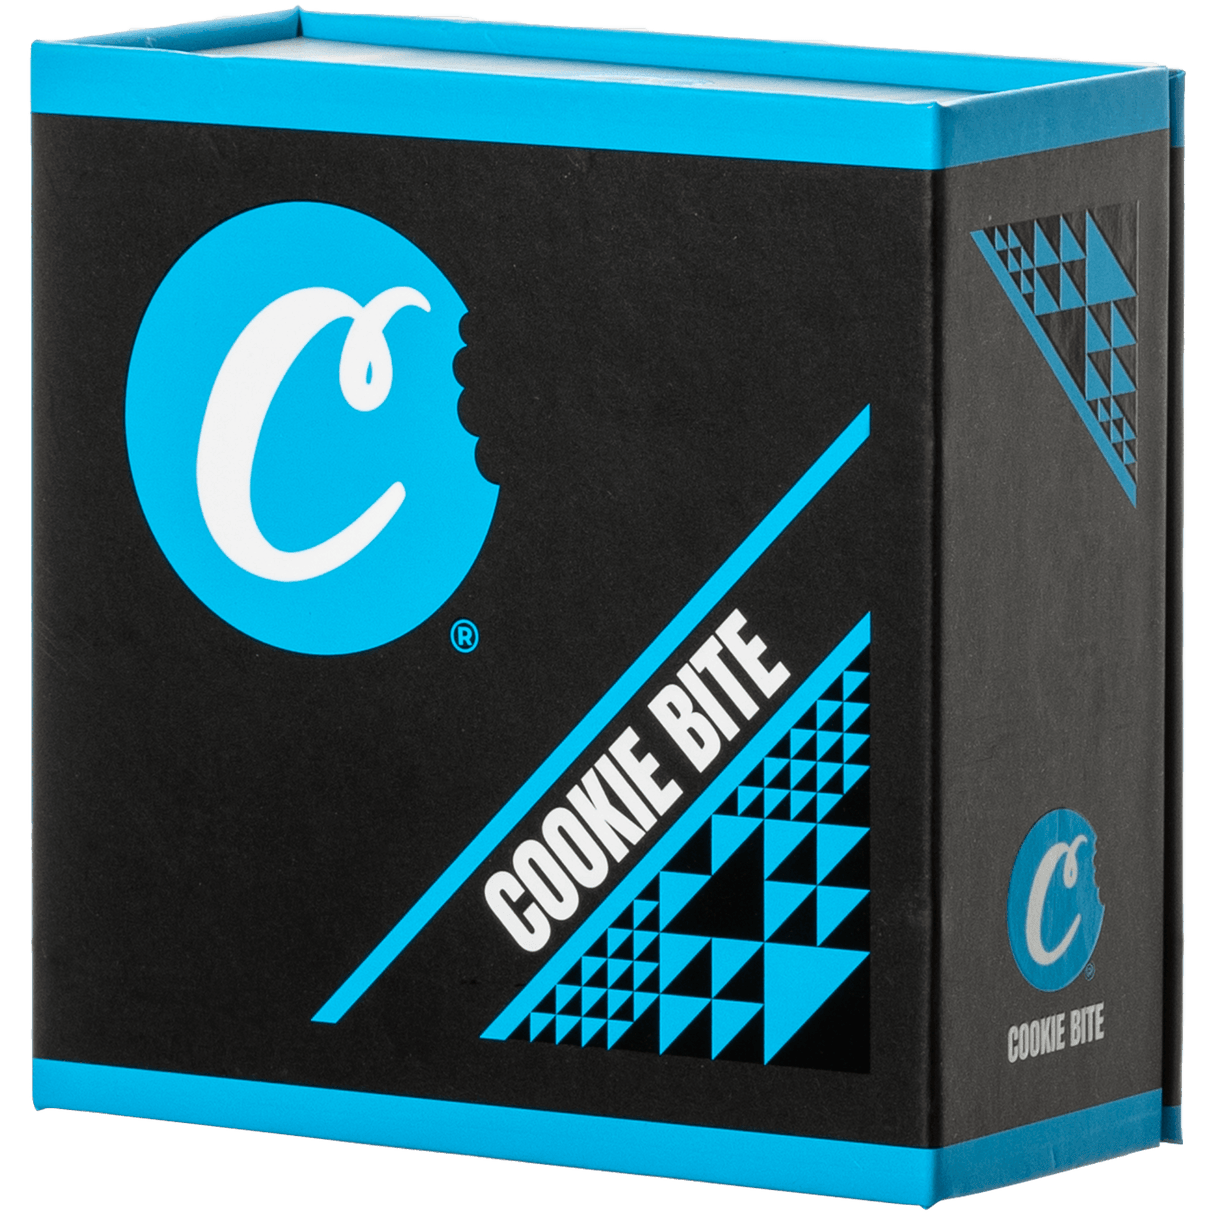 Cookies Bite Pipe packaging box with vibrant blue and black design